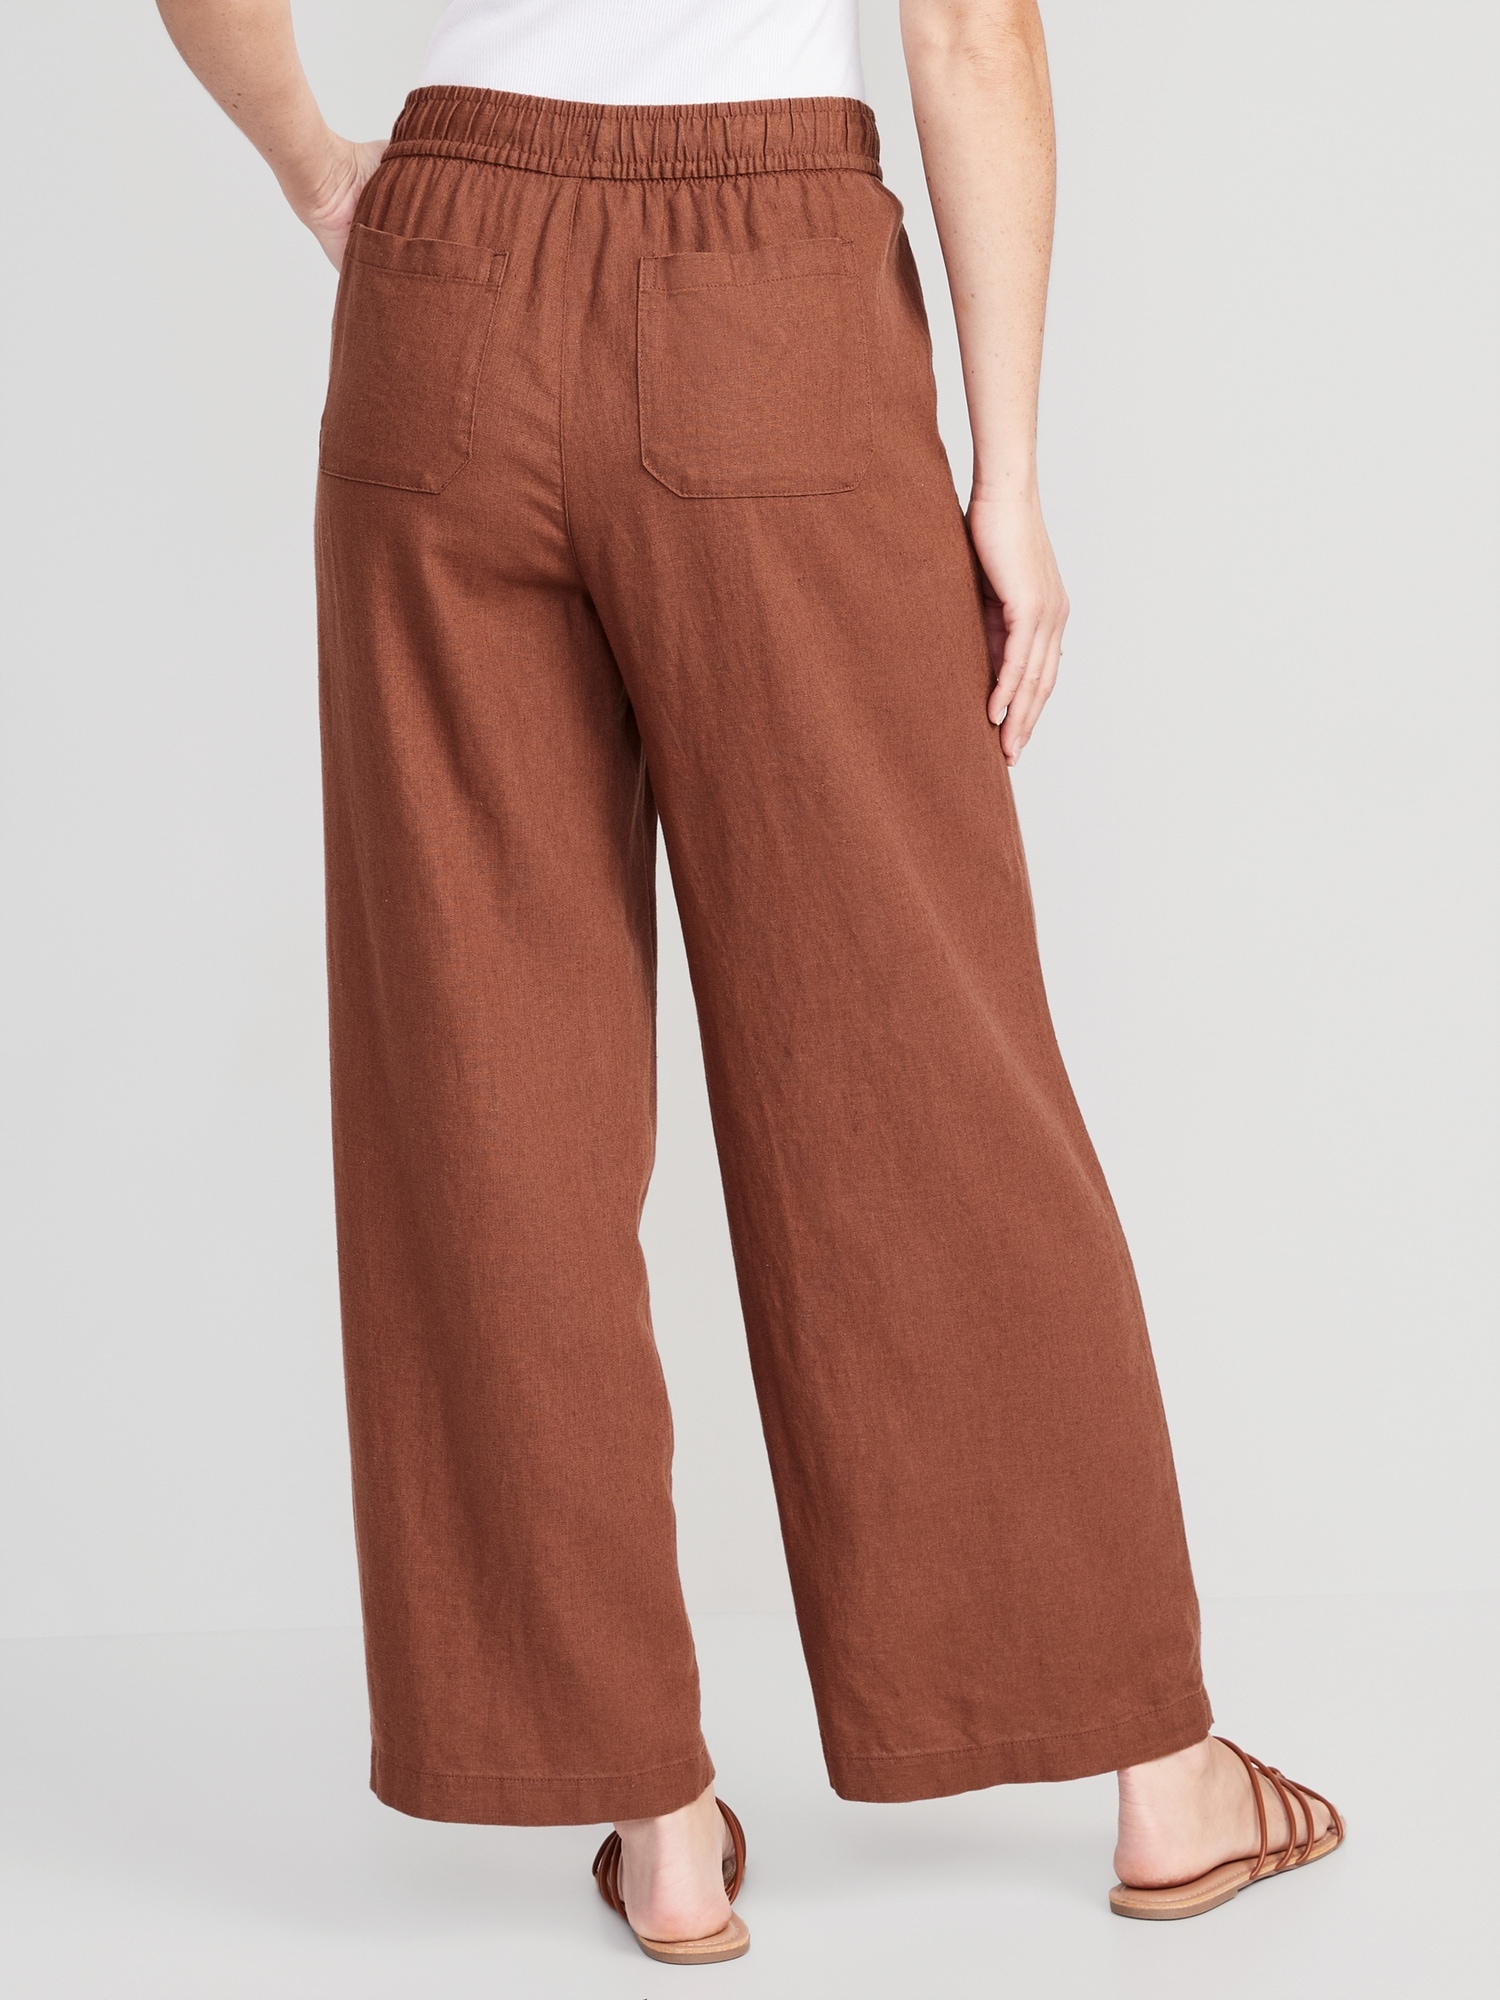 Best Linen Pants 2023 - Forbes Vetted